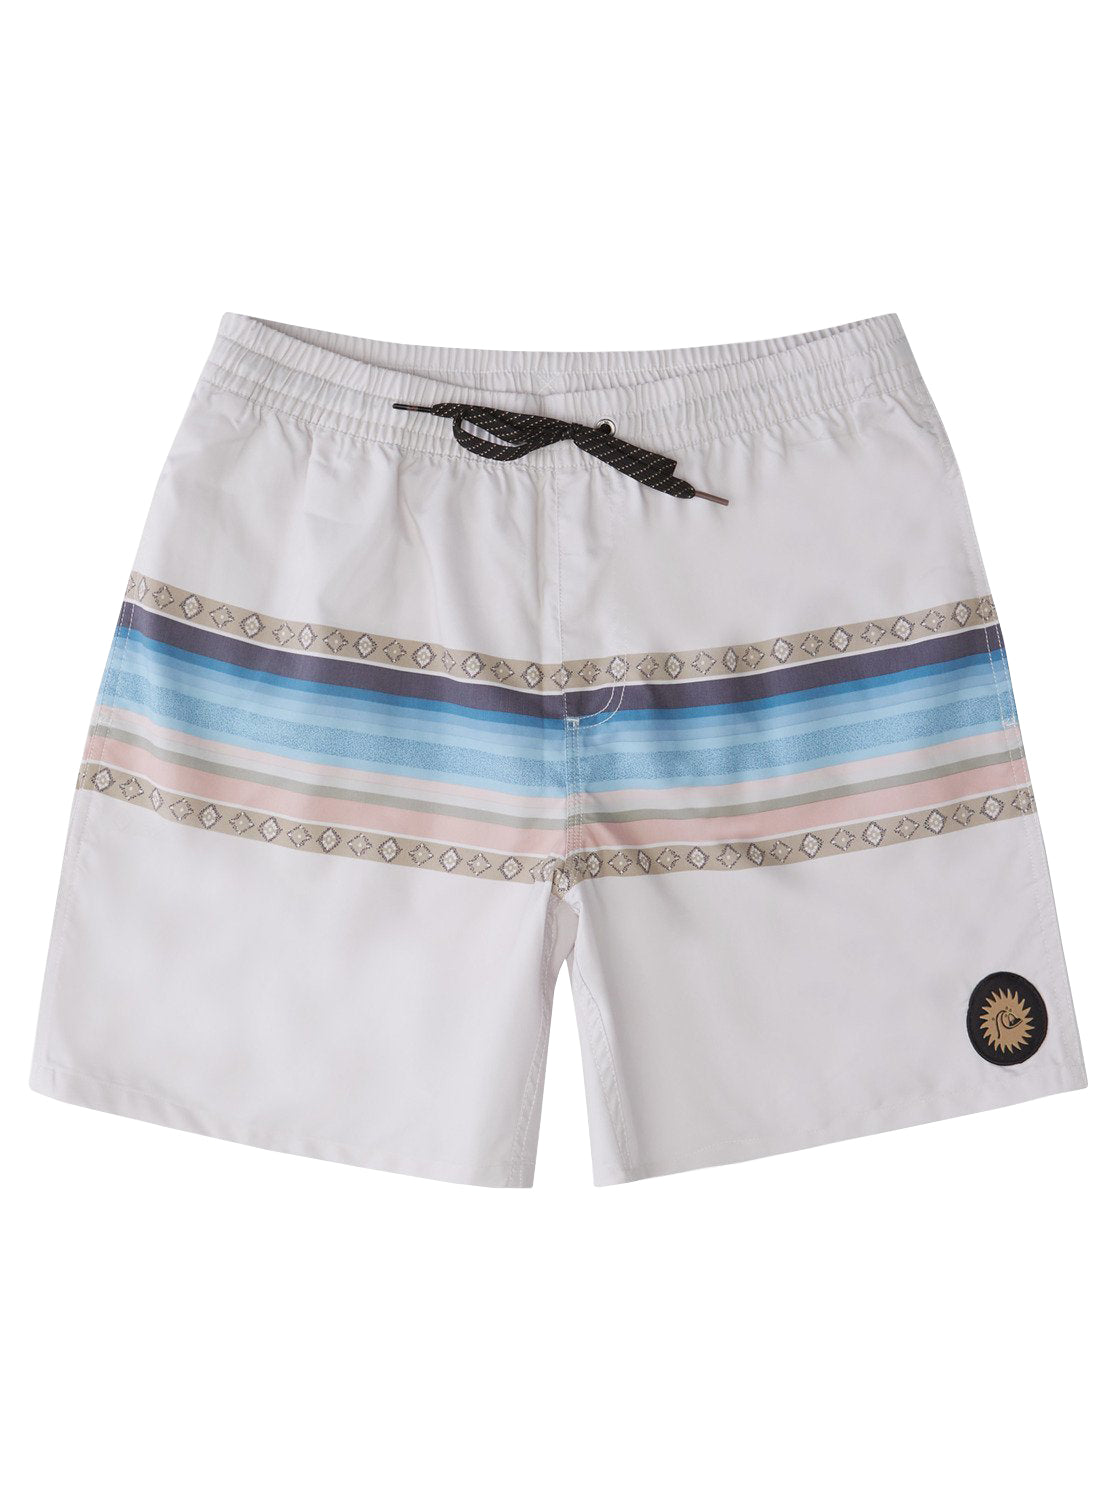 Quiksilver Sun Faded 17 Volley WCL6 M